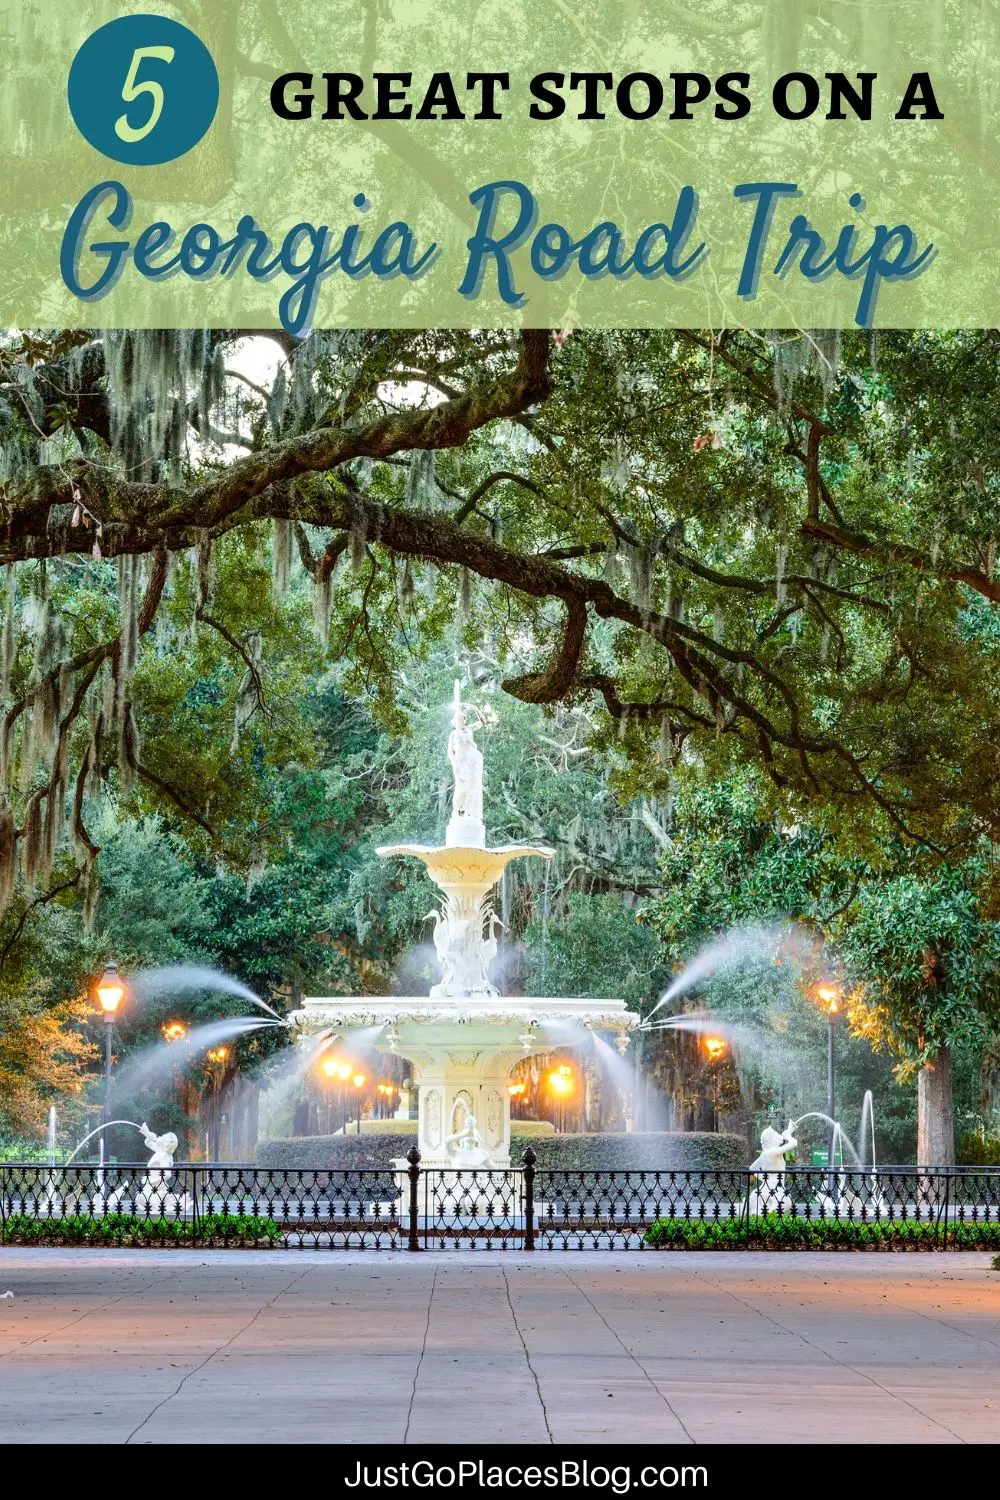 Pinterest Image of a fountain in Savannah Georgia framed by live oaks with the text: “5 great stops for a Georgia Road Trip"